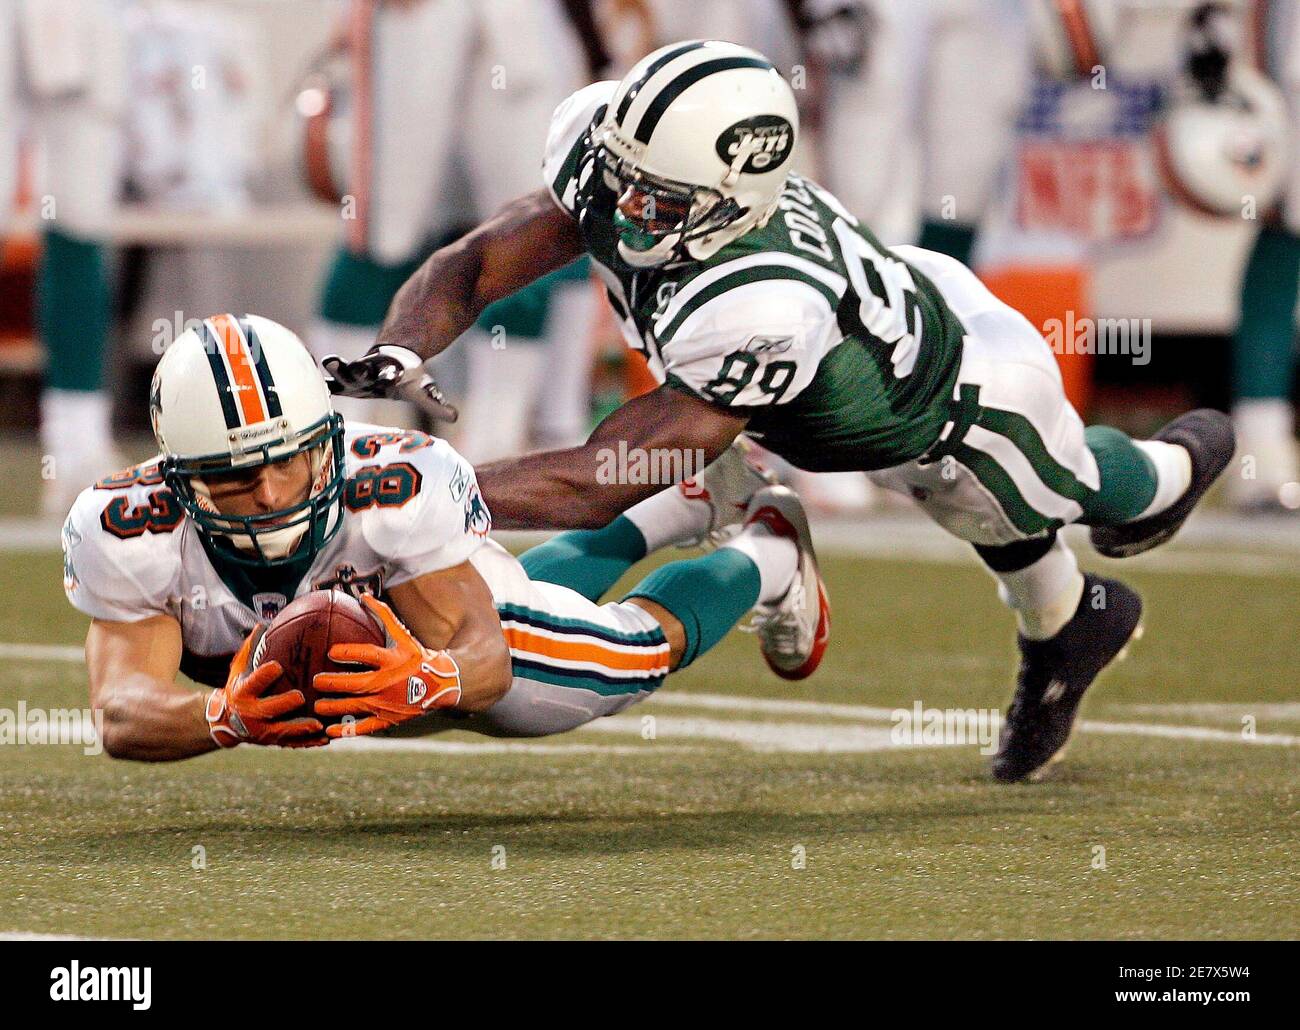 Miami Dolphins Wes Welker (83) outreaches New York Jets Jerricho Cotchery  (89) to recover his own fumble after he called a fair catch and then  fumbled it on a punt in the